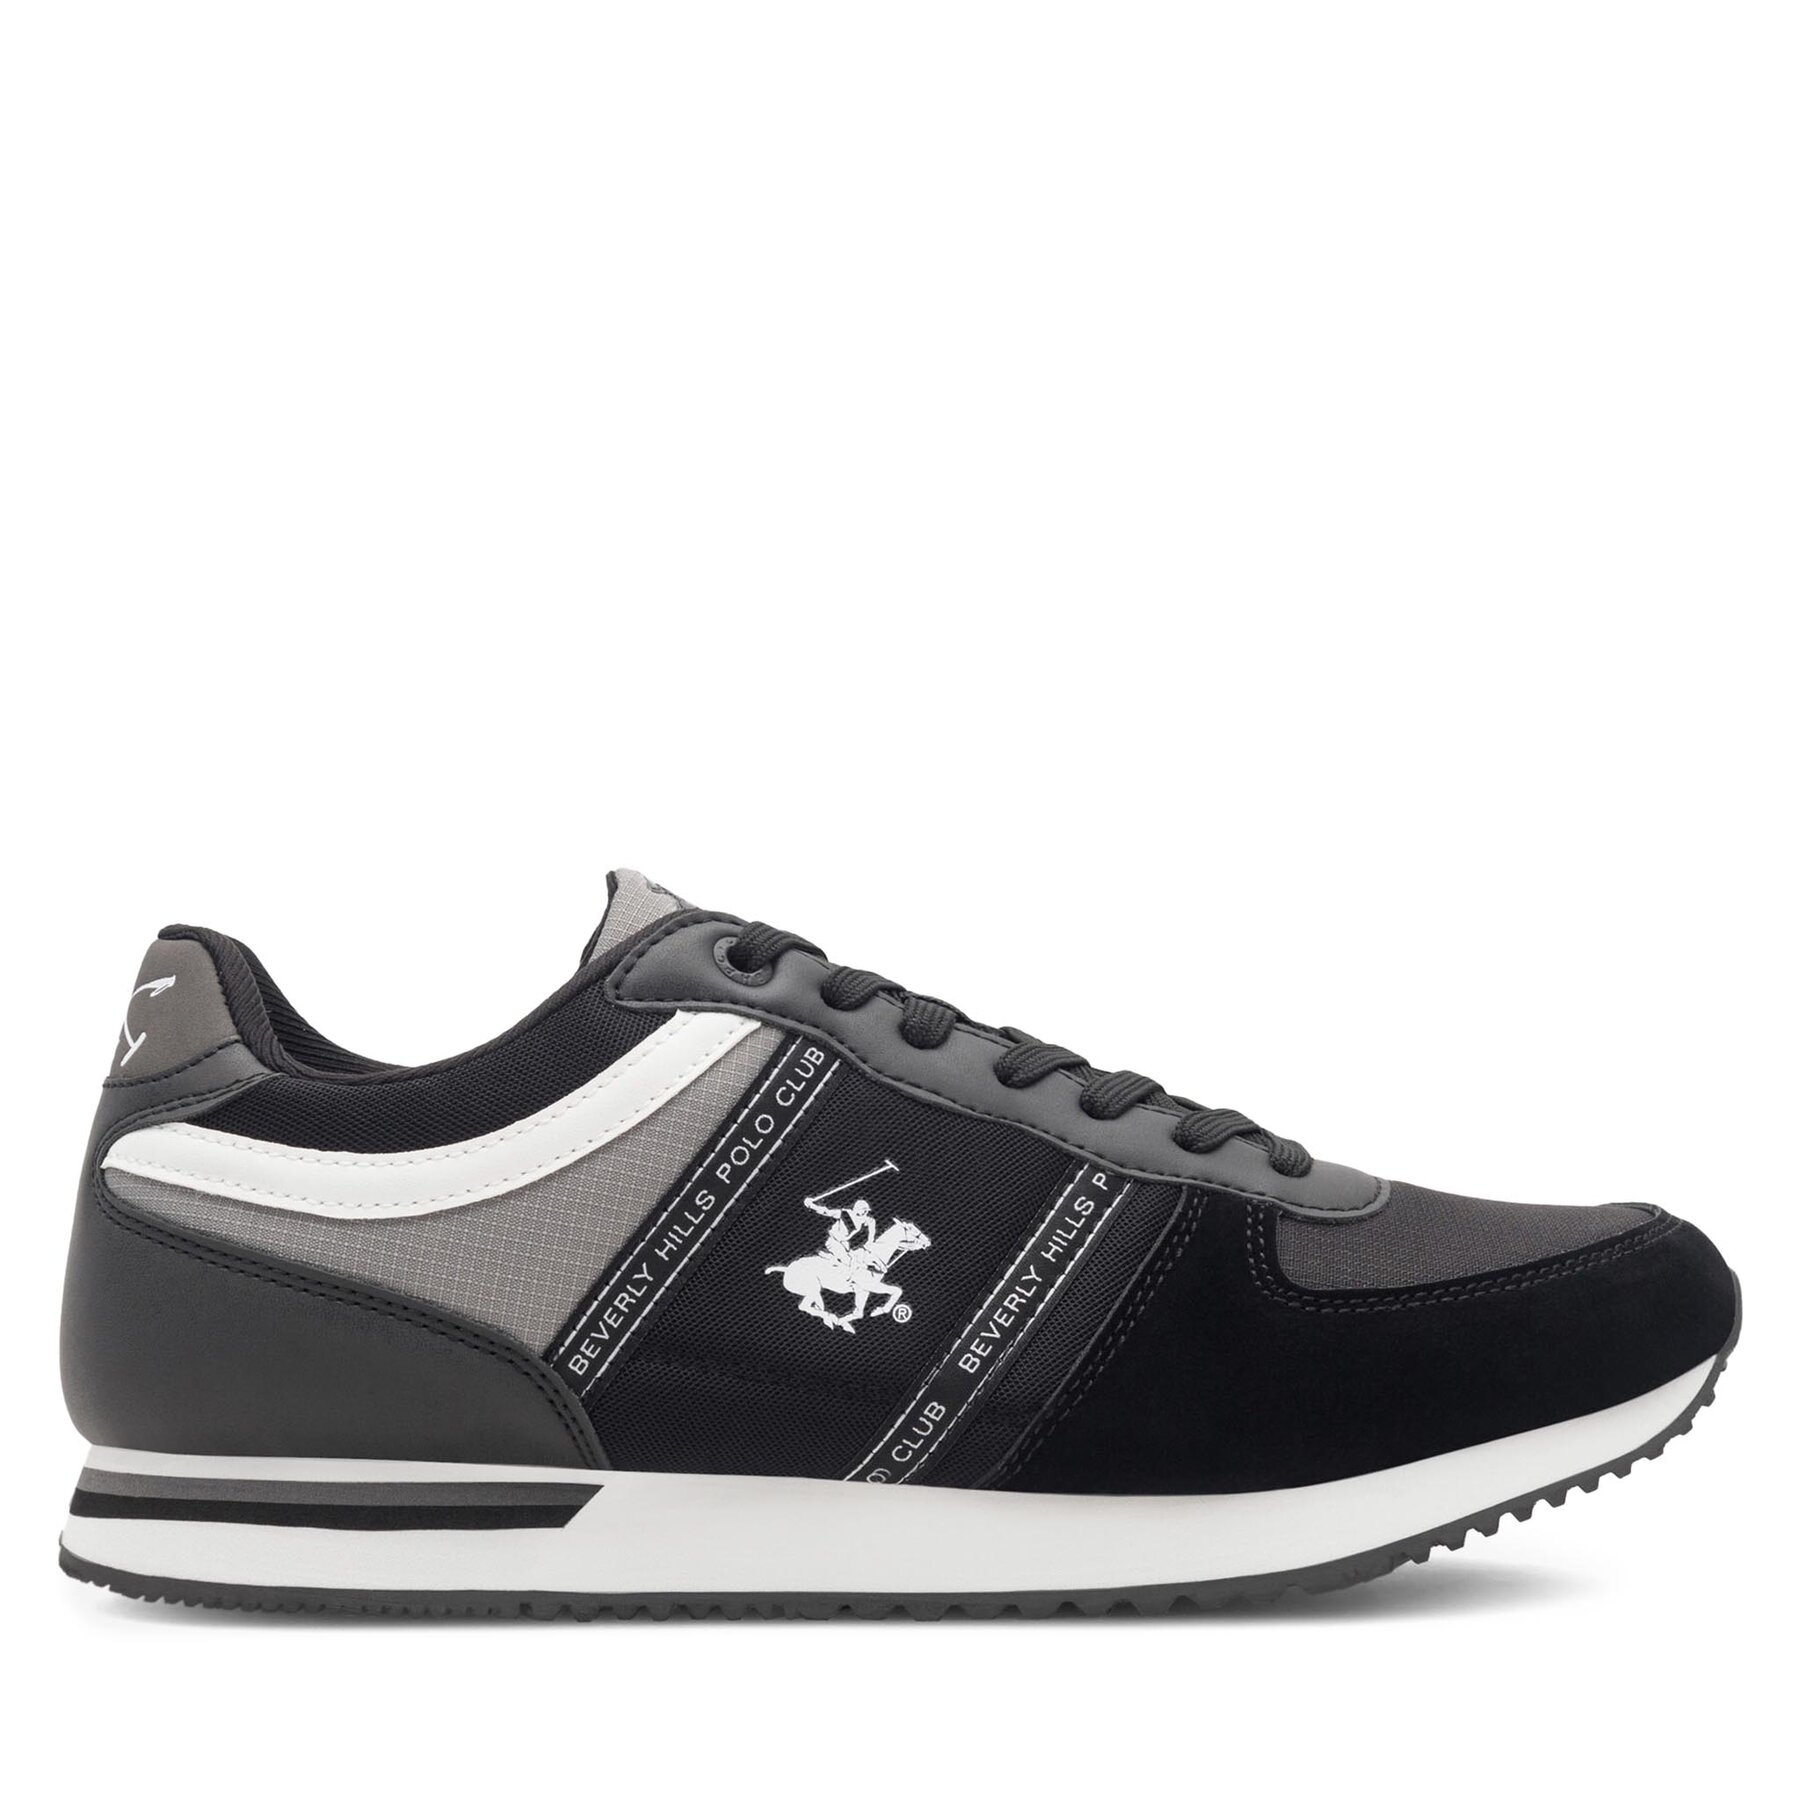 Sneakers Beverly Hills Polo Club BOWIE-01 Schwarz von Beverly Hills Polo Club